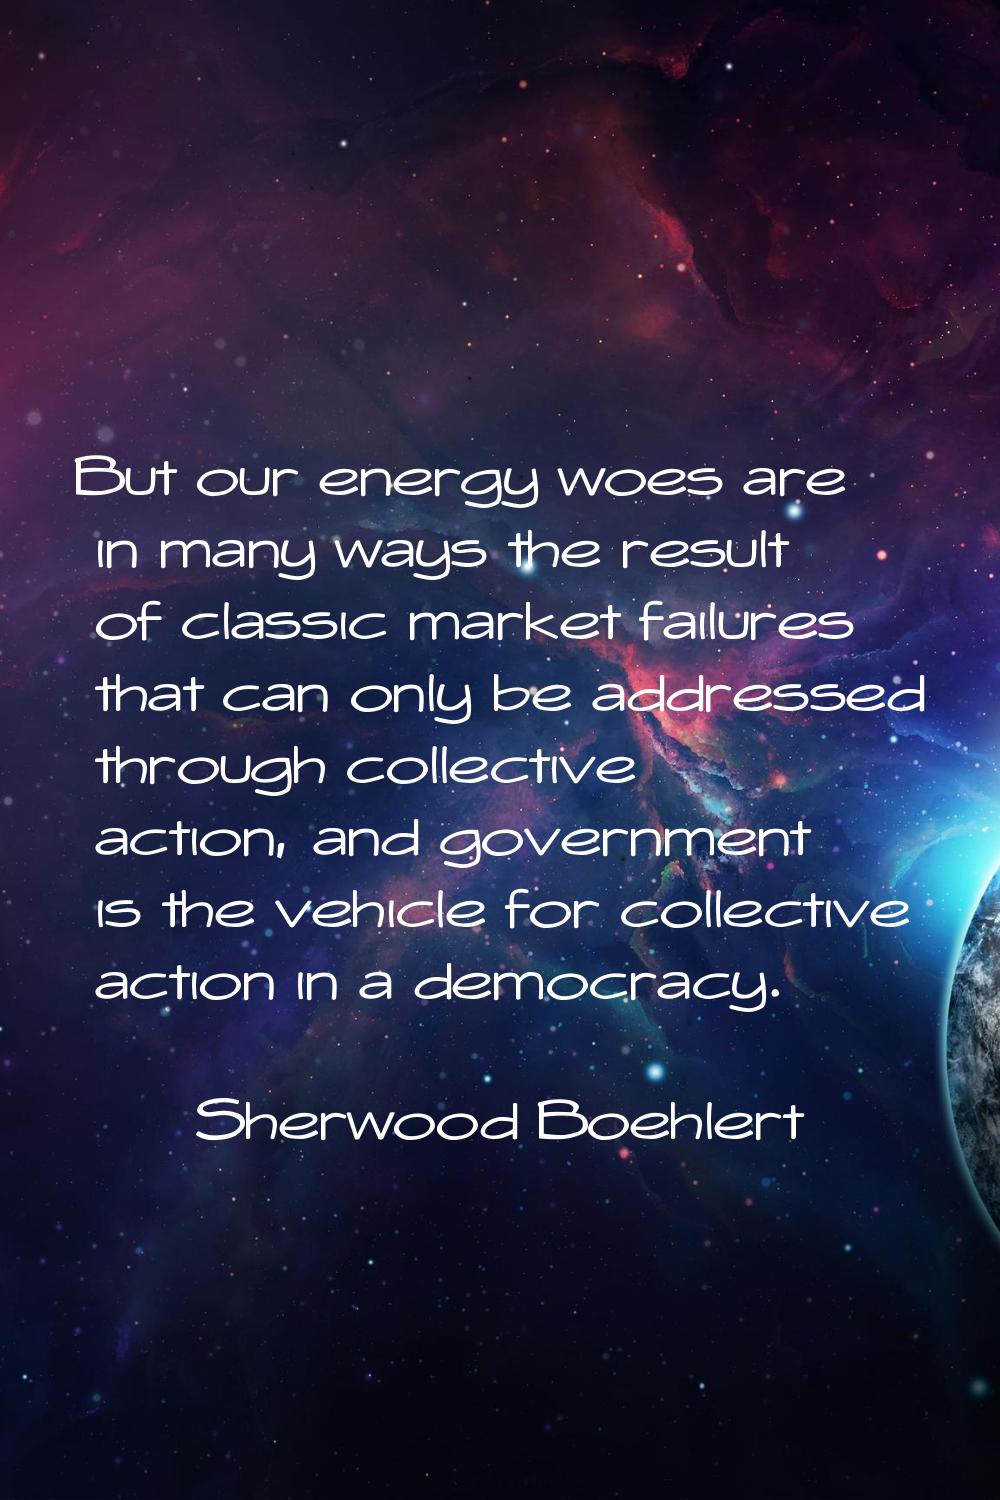 But our energy woes are in many ways the result of classic market failures that can only be address